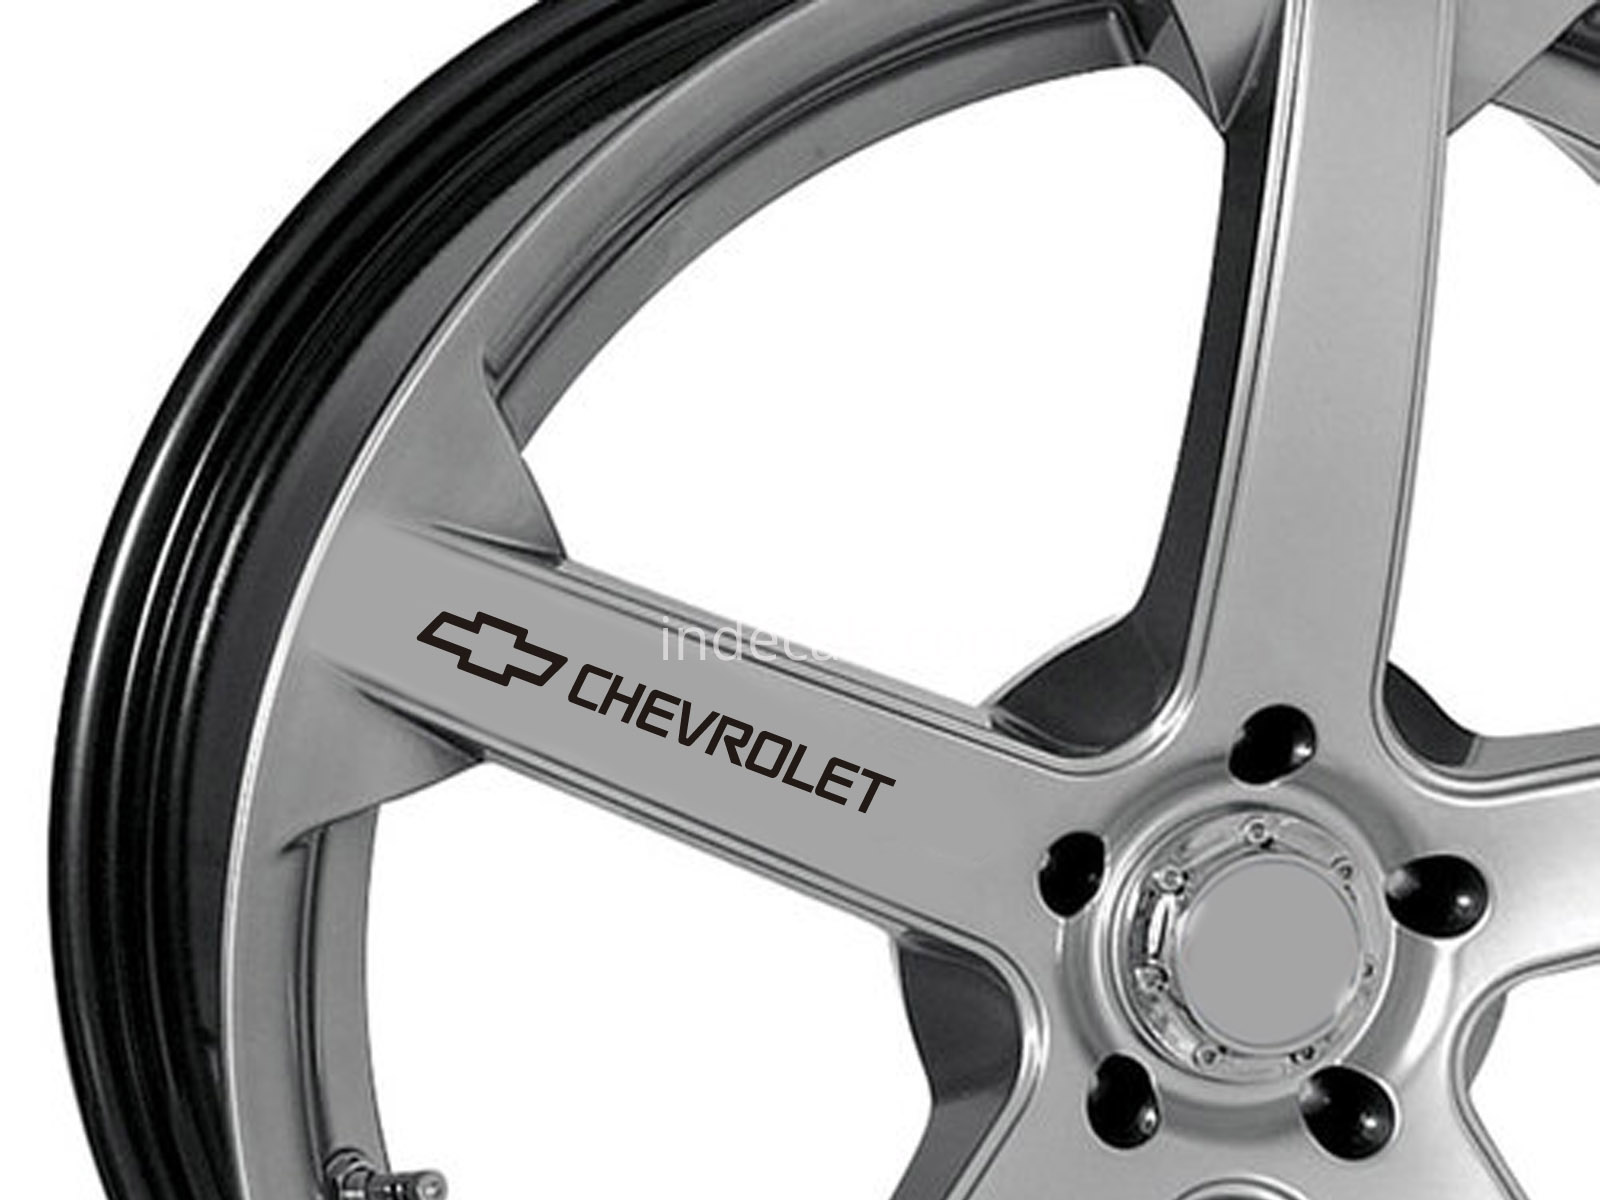 6 x Chevrolet Stickers for Wheels - Black